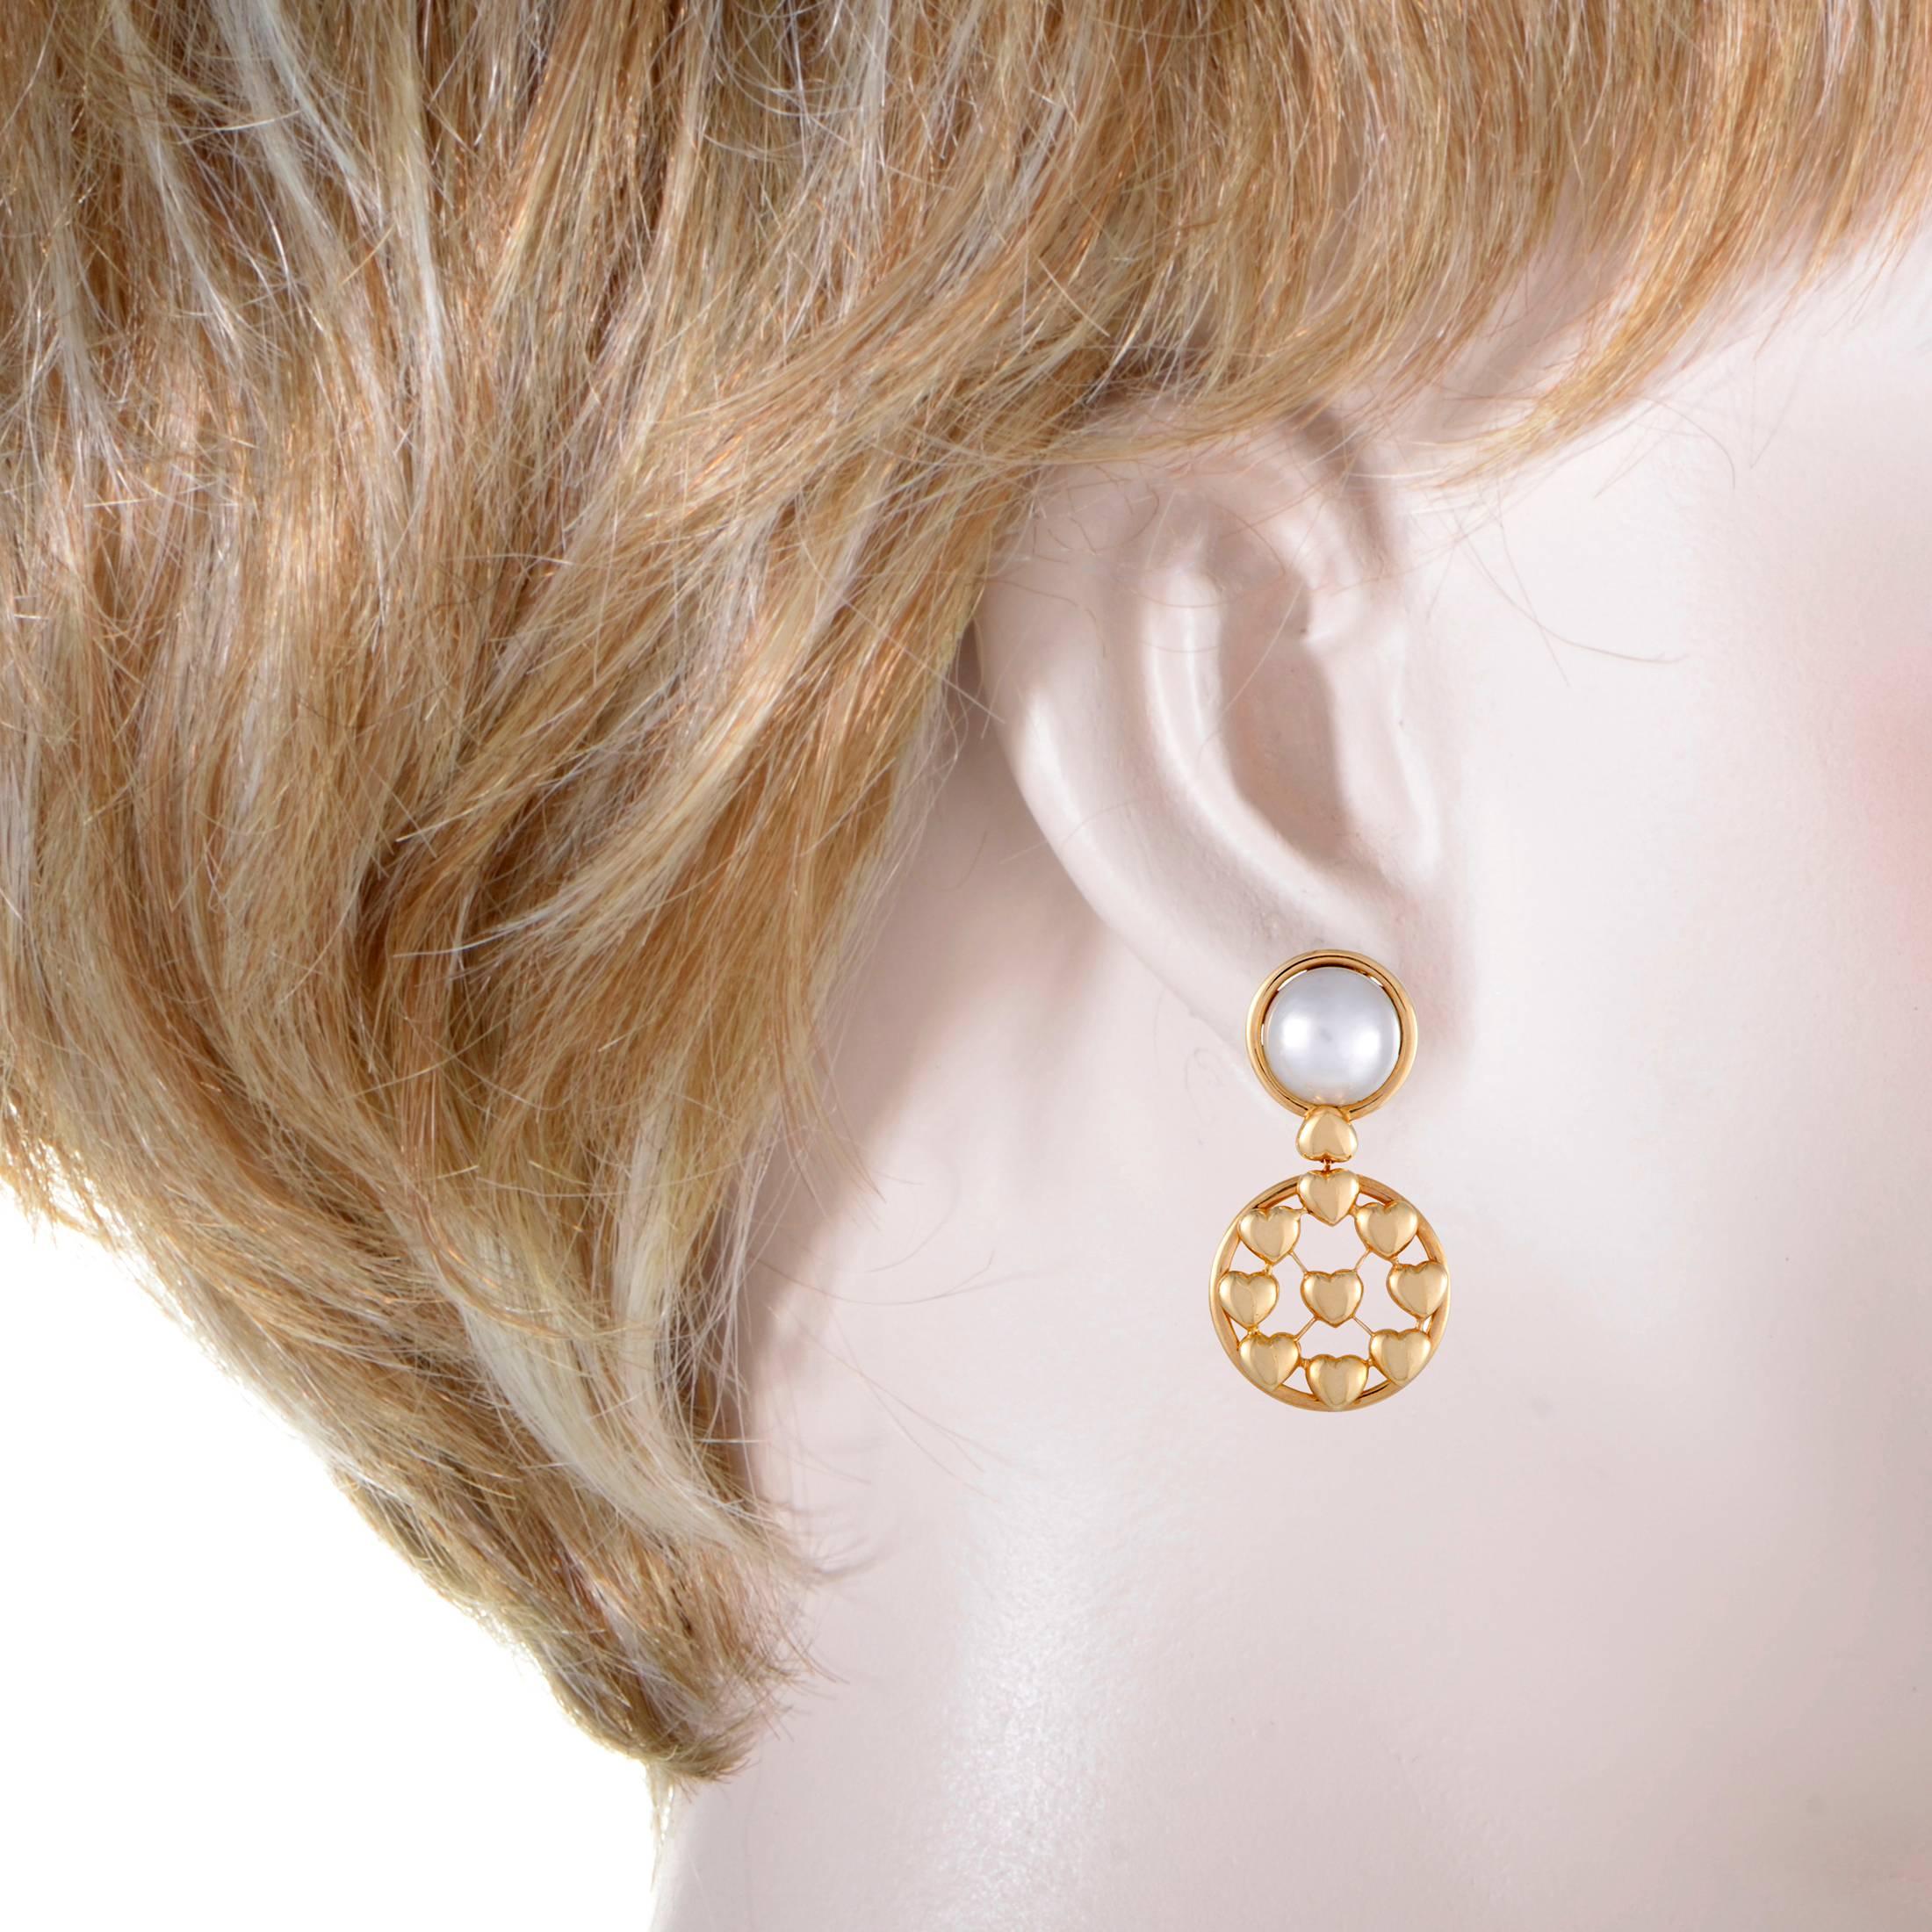 Exceptionally graceful and feminine, these lovely earrings are presented by Dior and offer an incredibly stylish, elegant look. The pair is made of classy 18K yellow gold and each earring is decorated with dainty hearts and a sublime pearl.
Included